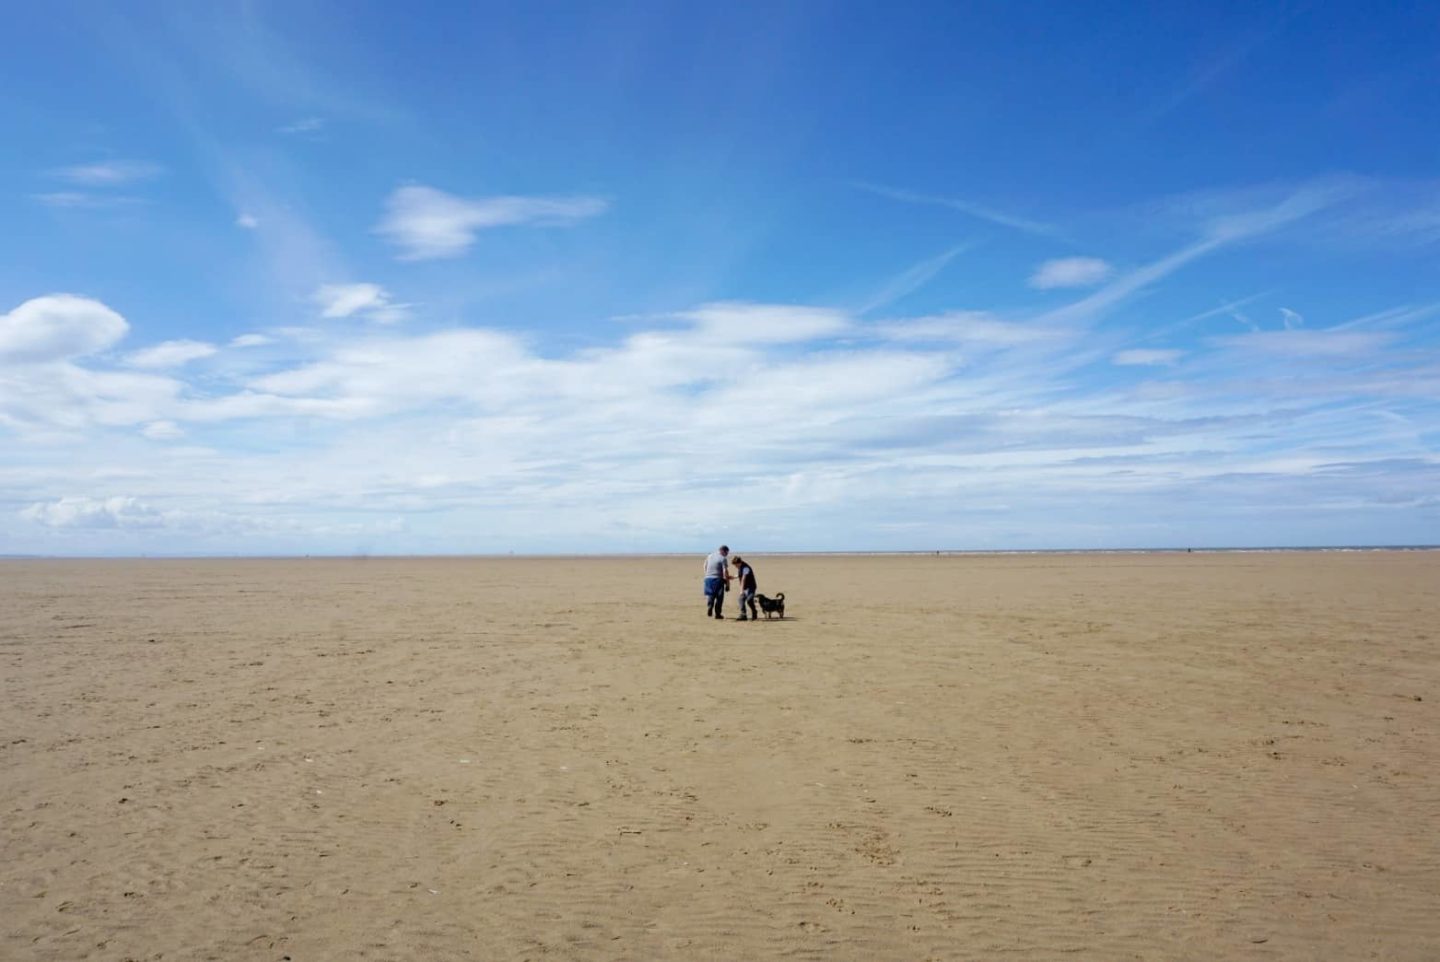 A walk on the beach At St Annes www.extraordinarychaos.com